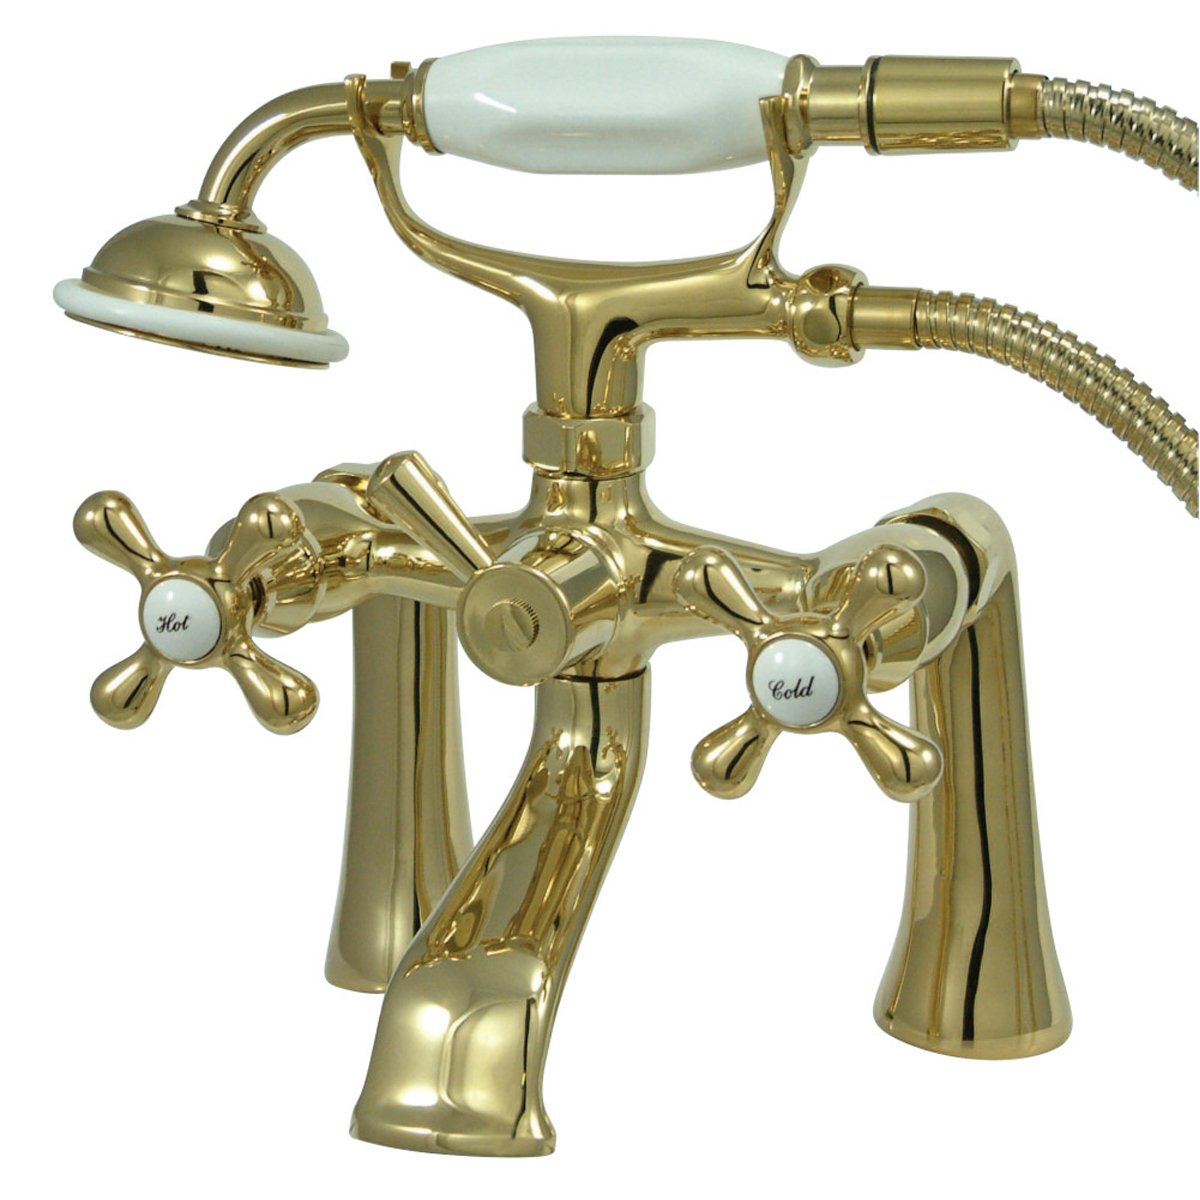 Kingston Brass Deck Mount 2-Hole Clawfoot Tub Faucet with Hand Shower